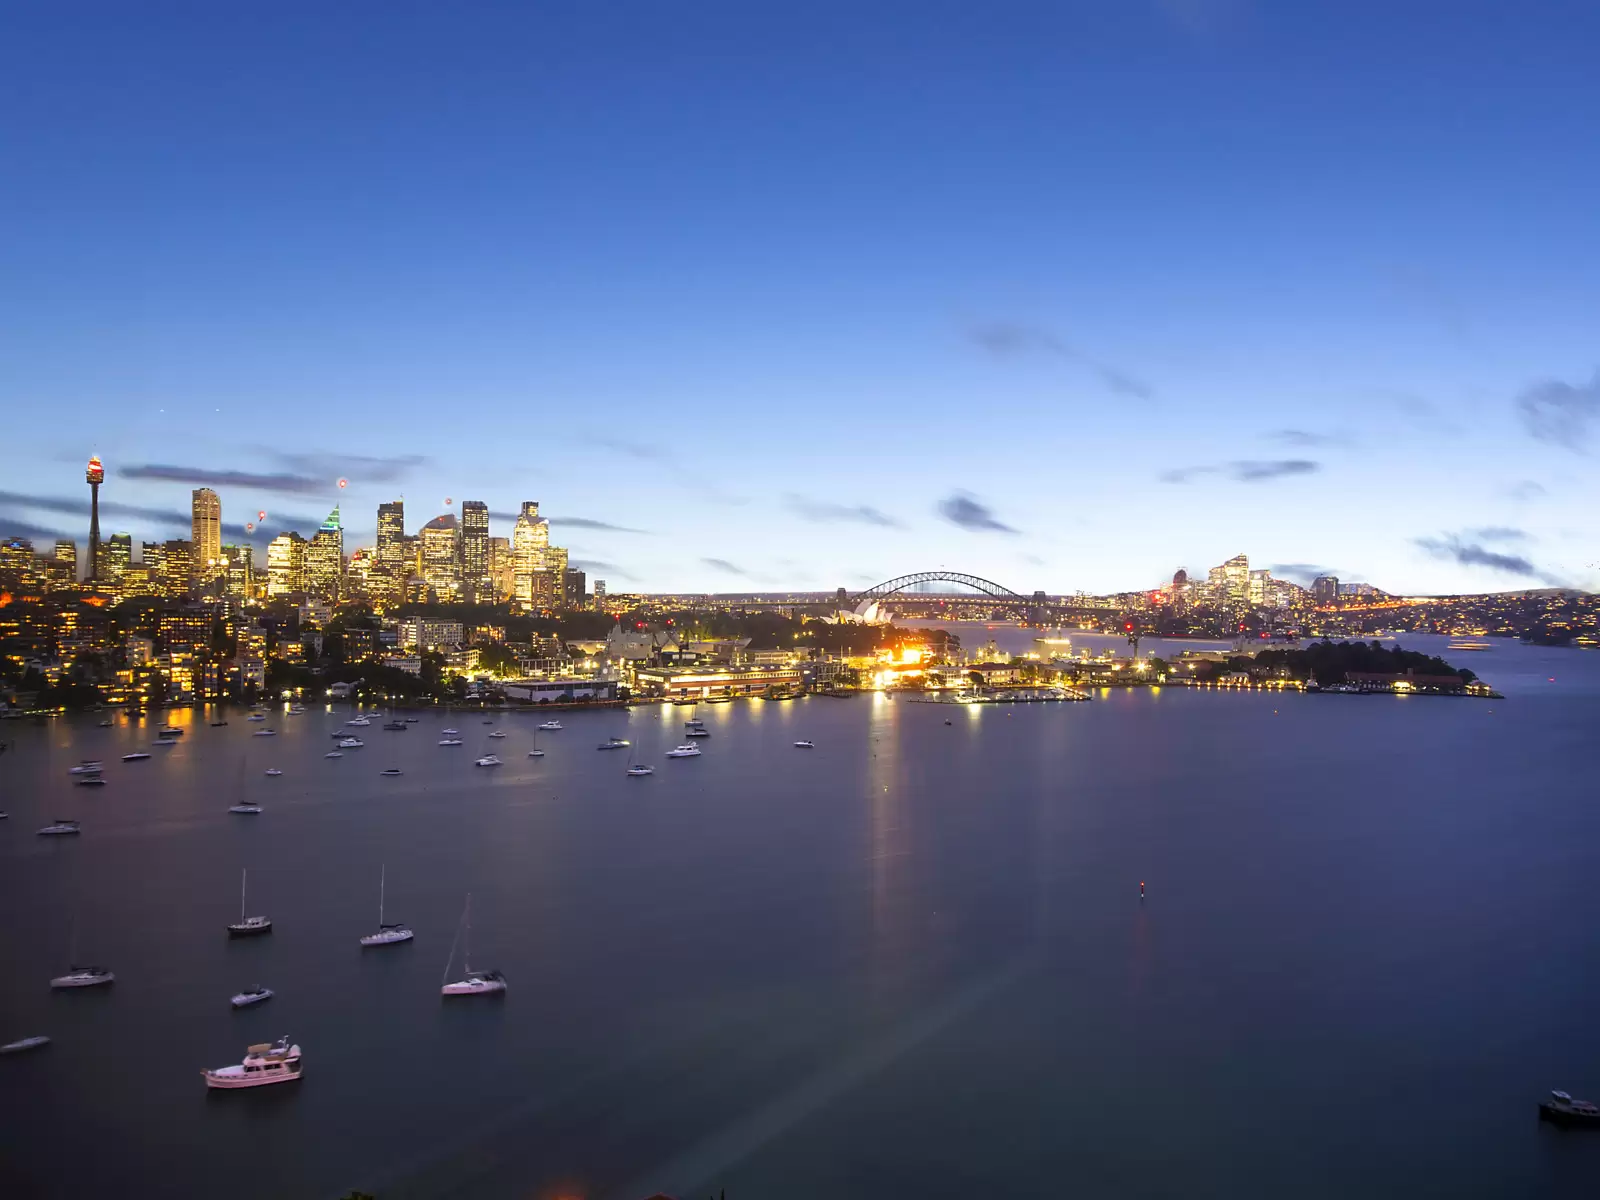 Photo #3: 18C/21 Thornton Street, Darling Point - Auction by Sydney Sotheby's International Realty